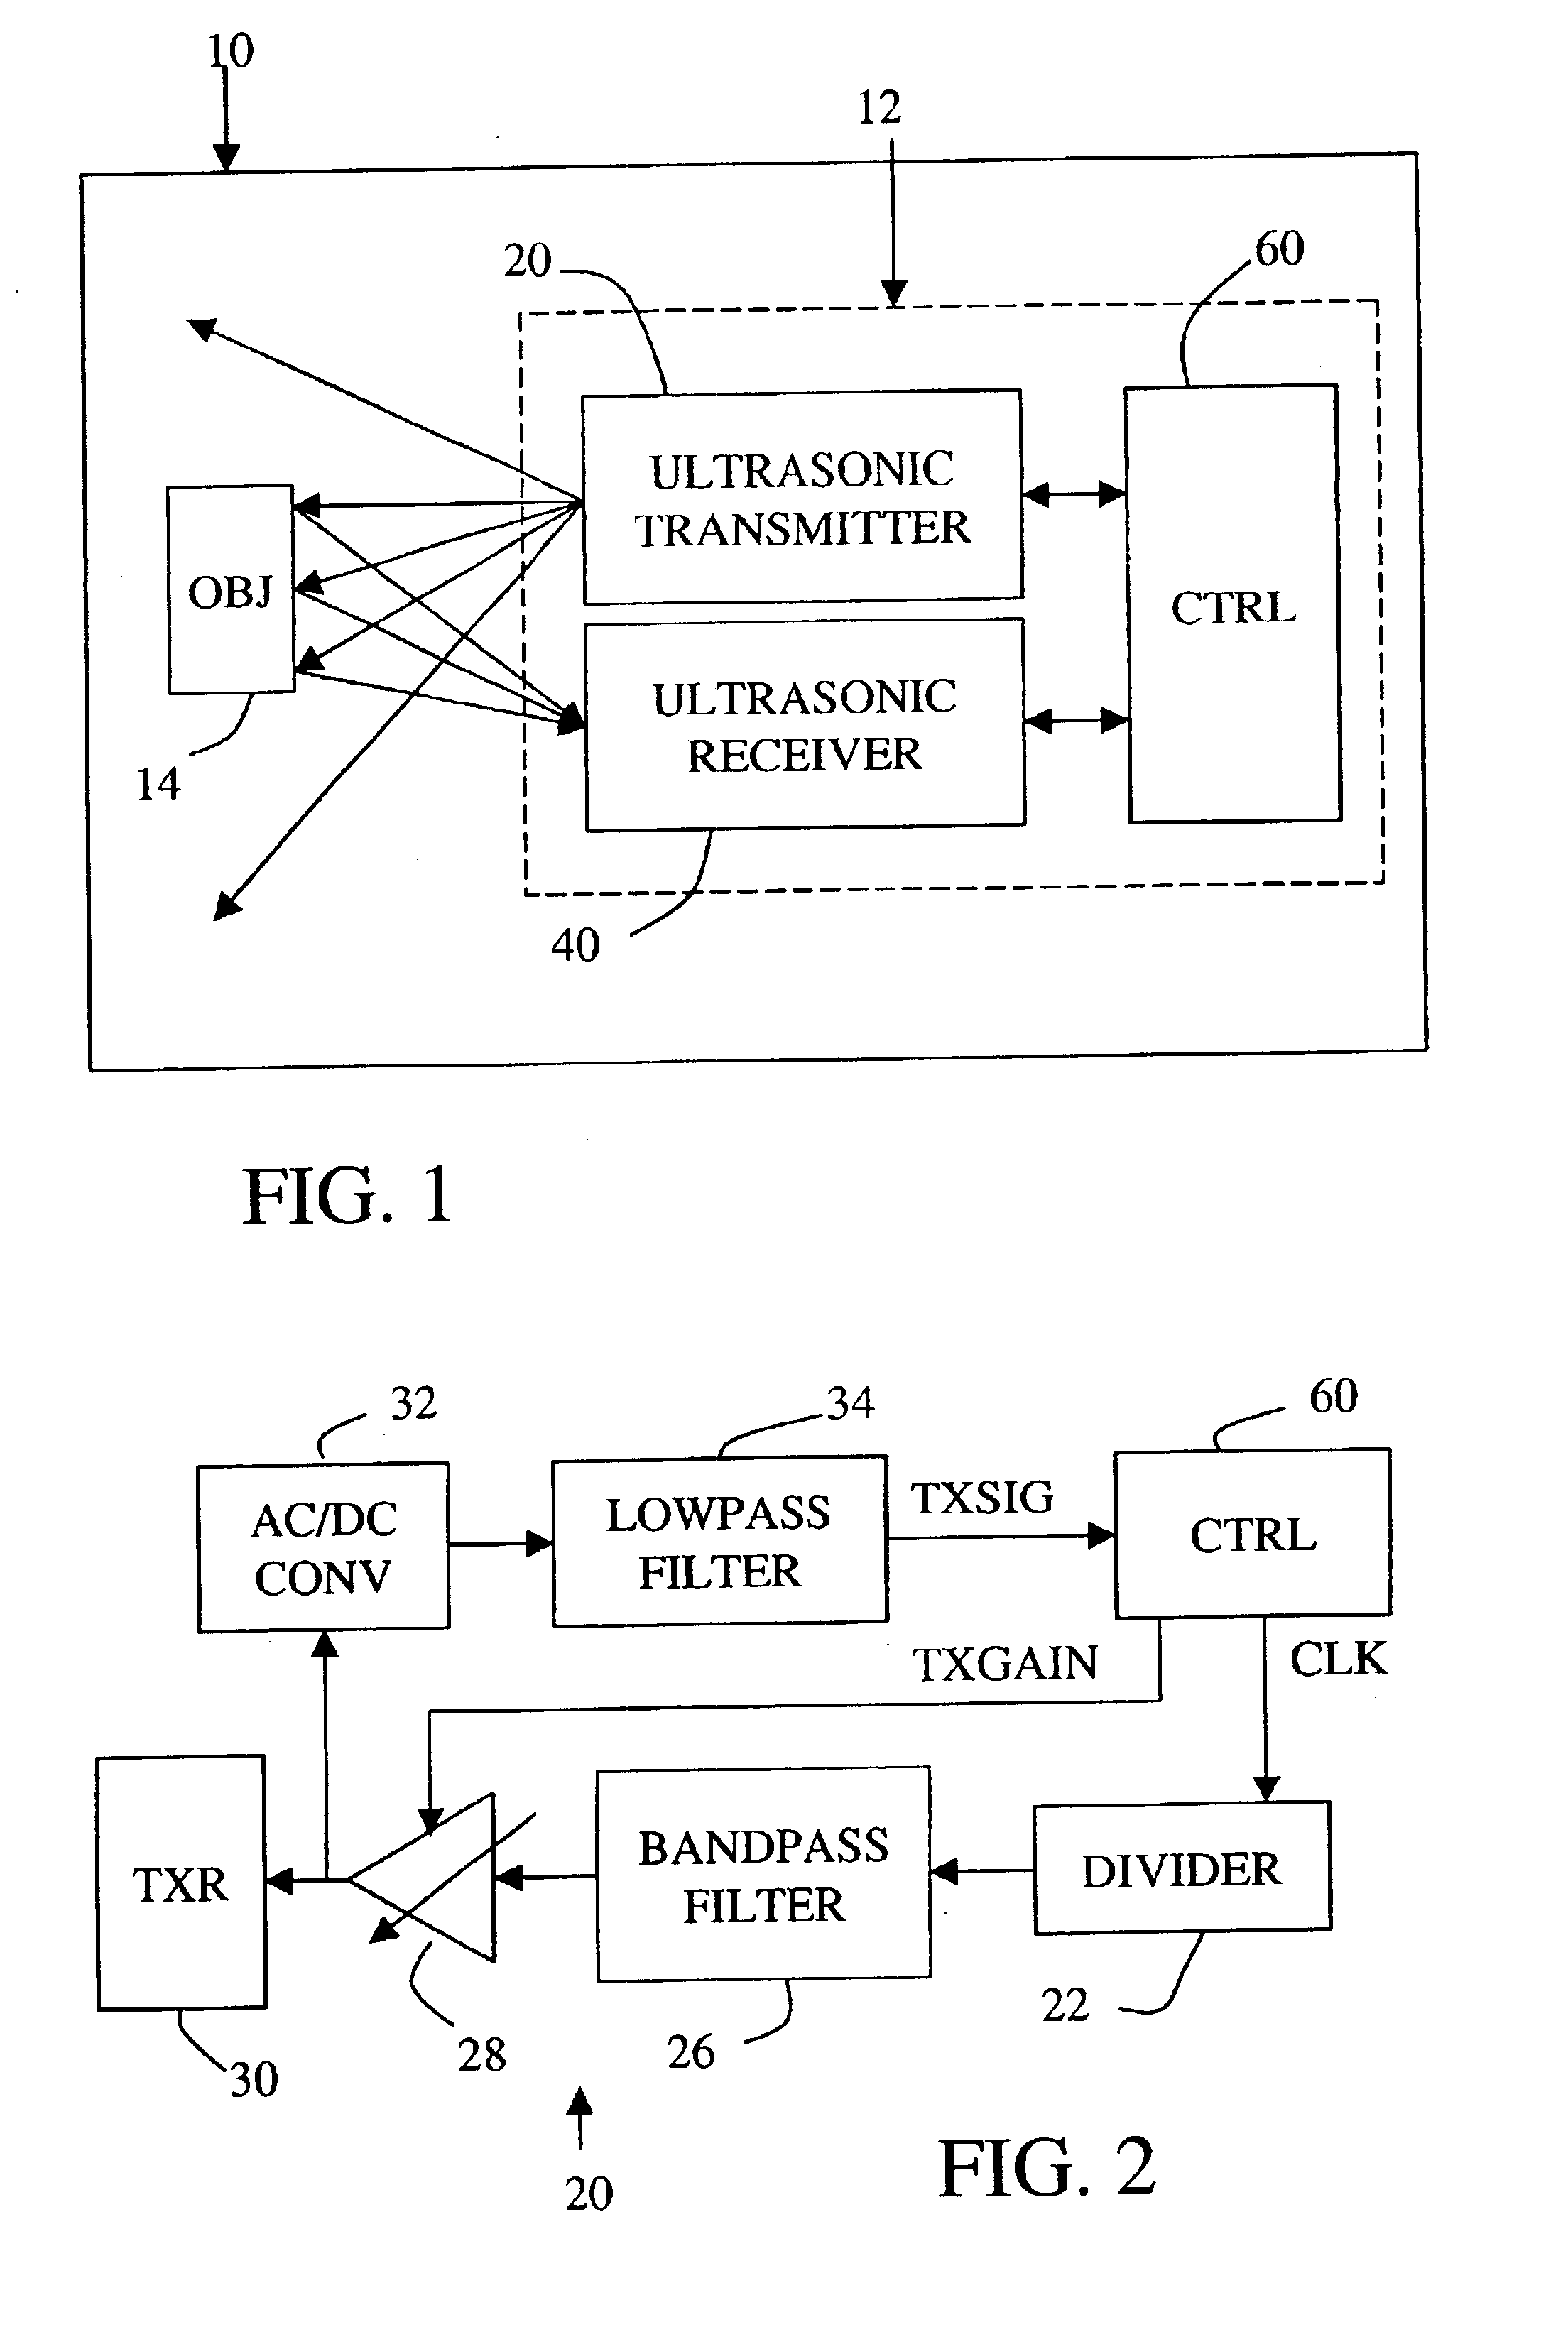 Ultrasonic occupant detection and classification system